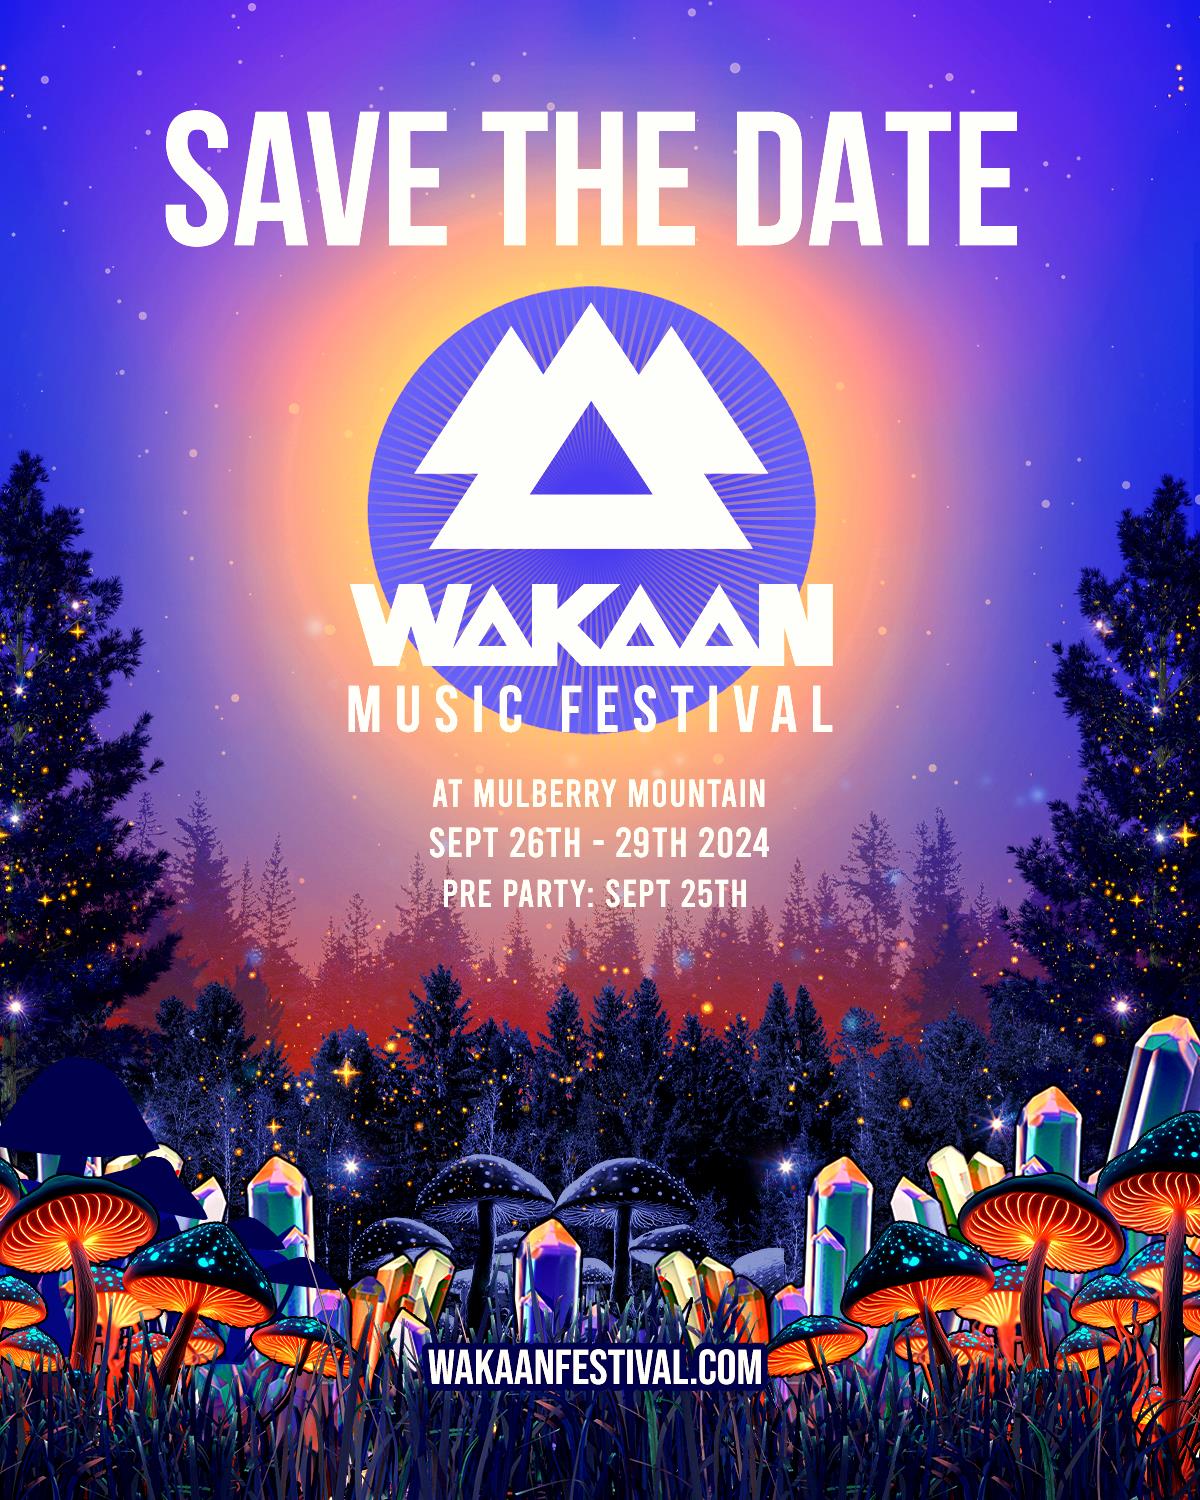 Buy Tickets to Wakaan Music Festival 2024 in Ozark on Sep 25, 2024